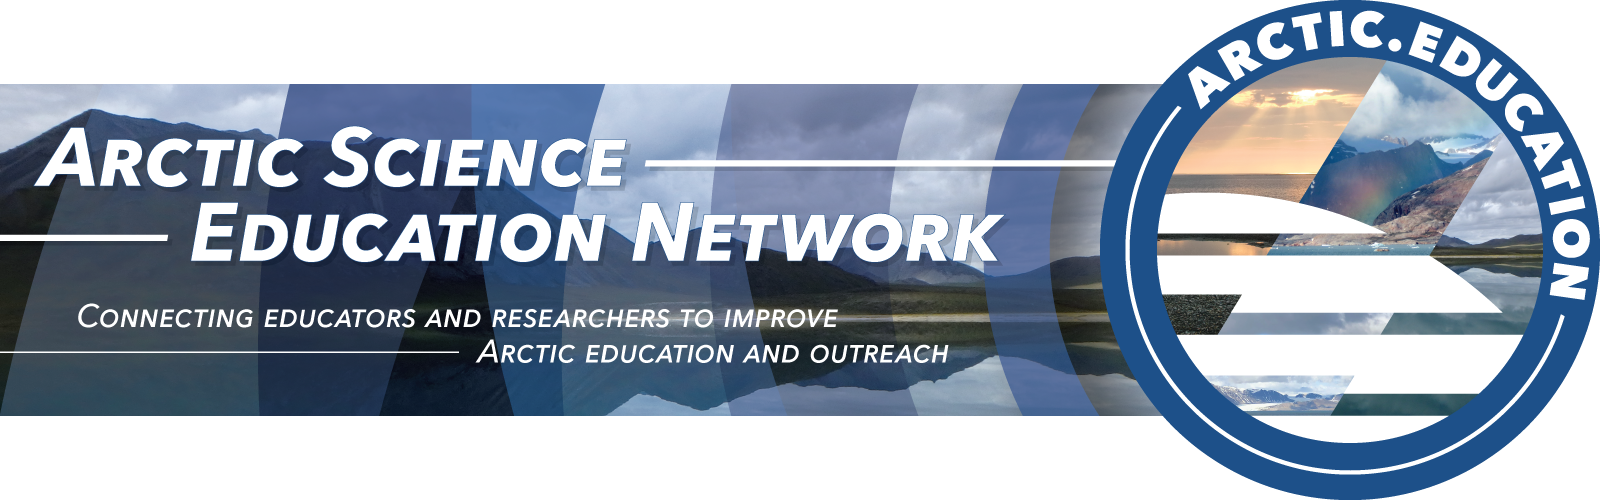 Arctic Science Education Network